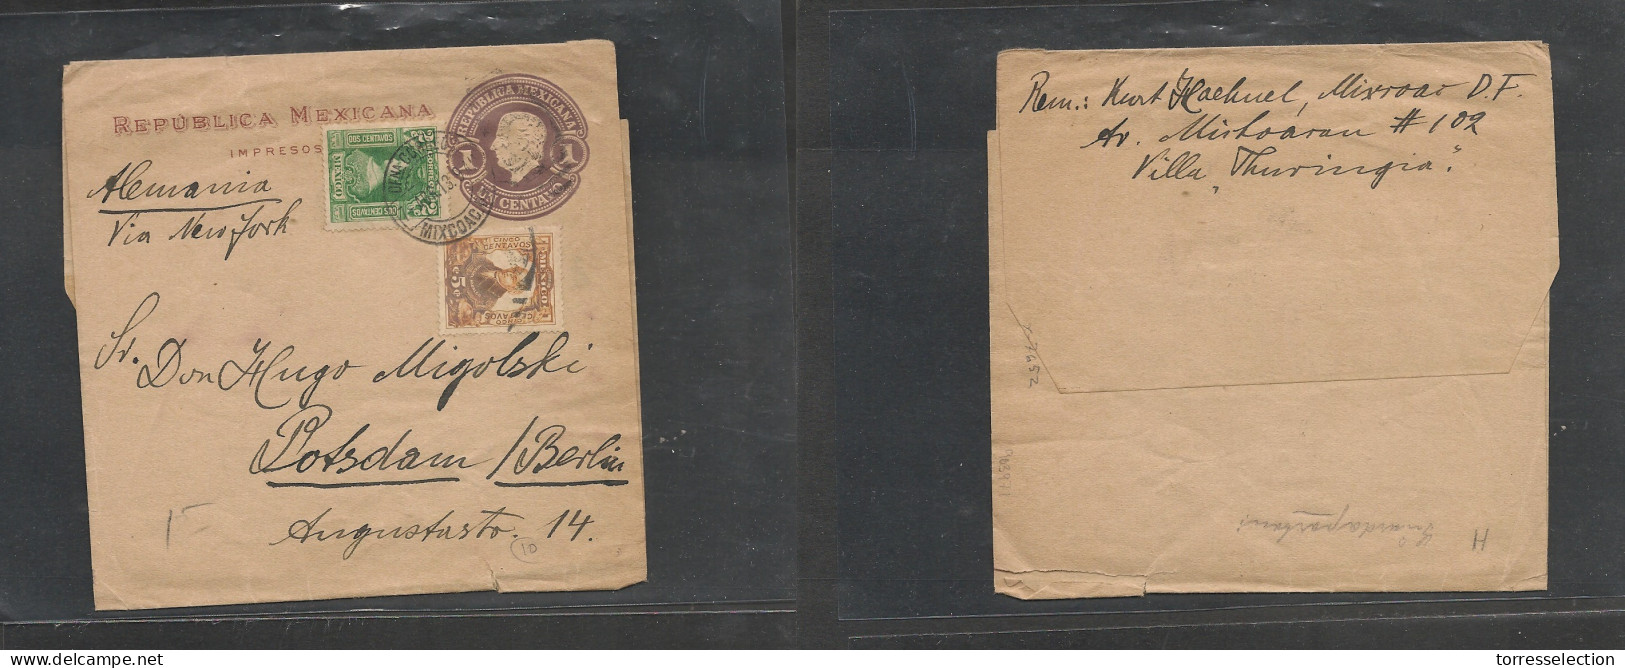 MEXICO. Mexico Cover - 1913 Stat Wcomplete Wrapper Mixcoac To Berlin Germany 1c Stat+ Two Adtls, Vf XSALE. - Mexico